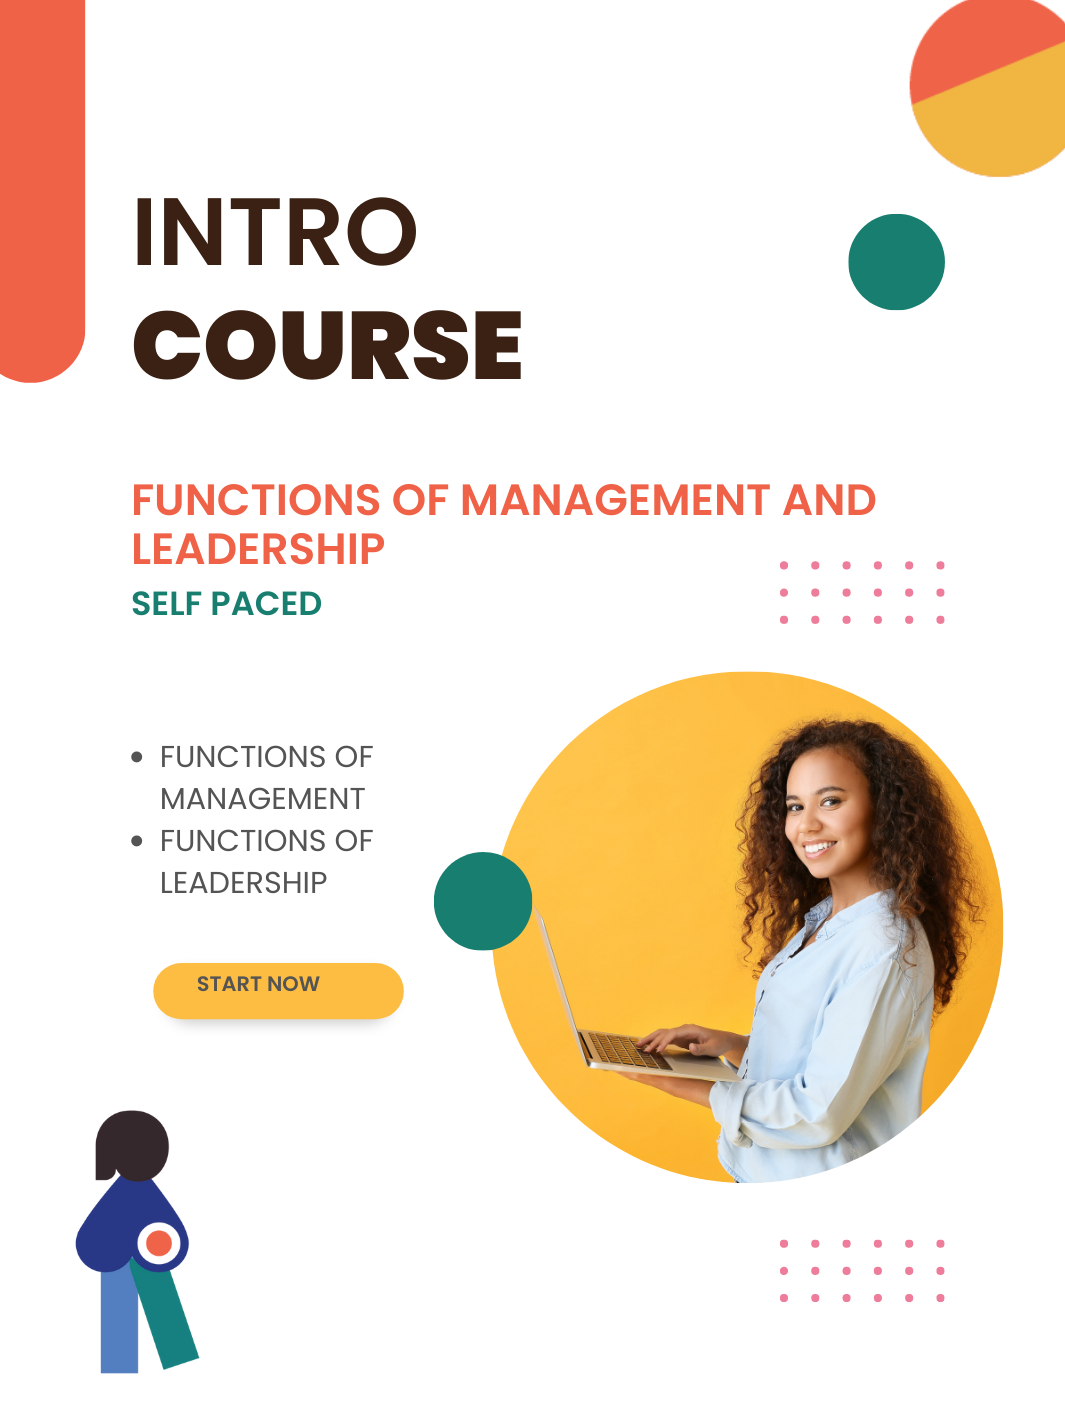 Introductory self paced online course on the functions of management and leadership. 